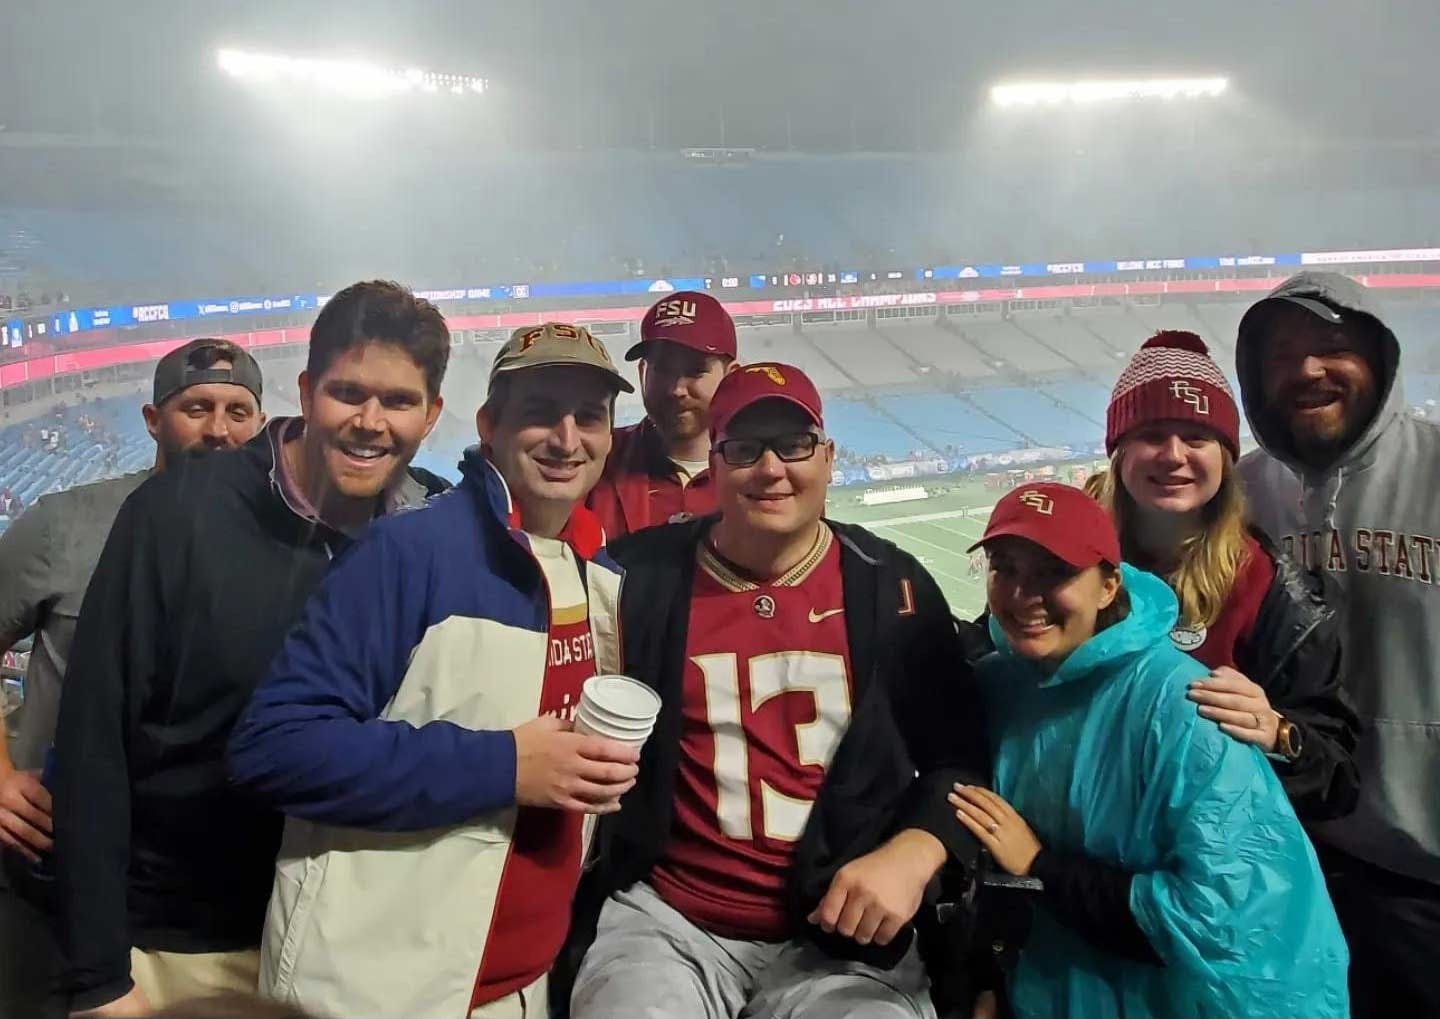 John and a group of friends at a college football game.